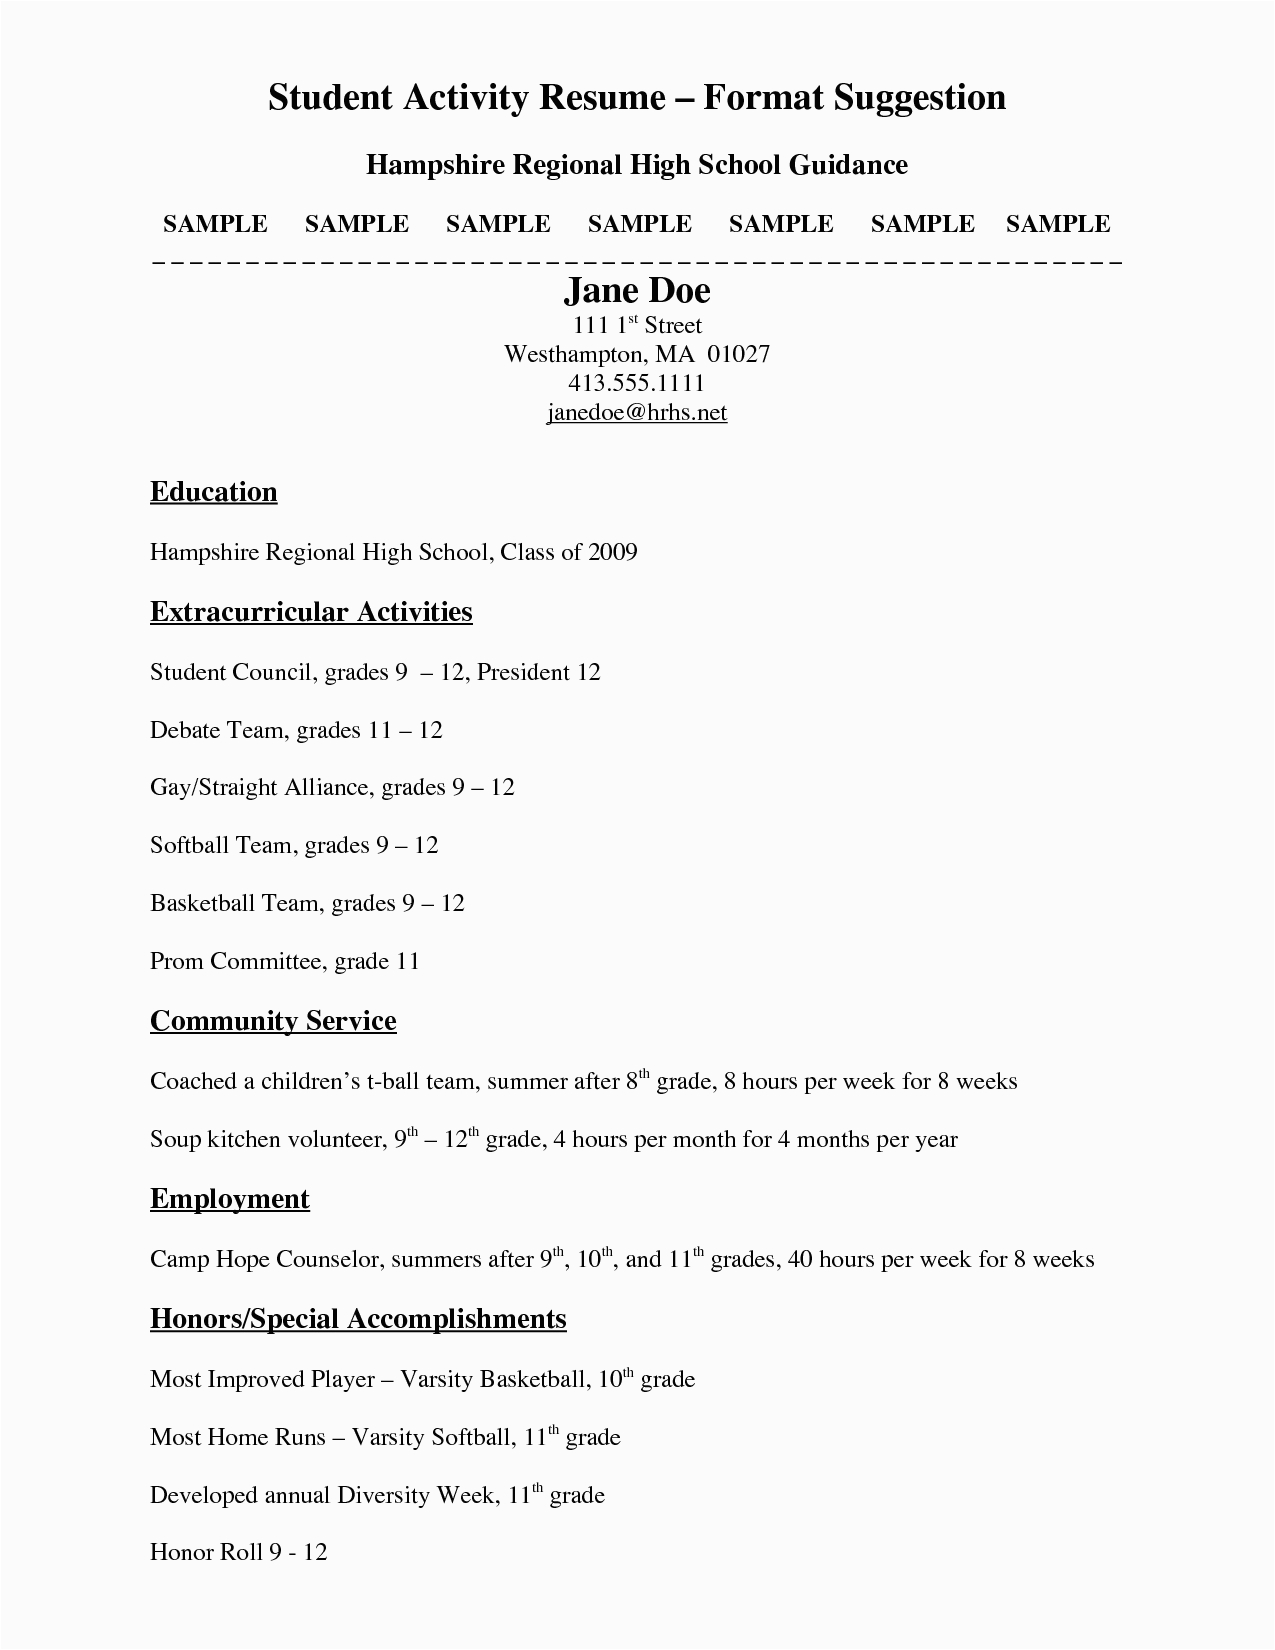 Sample High School Resume for College Admission 11 12 College Resume Samples for High School Senior